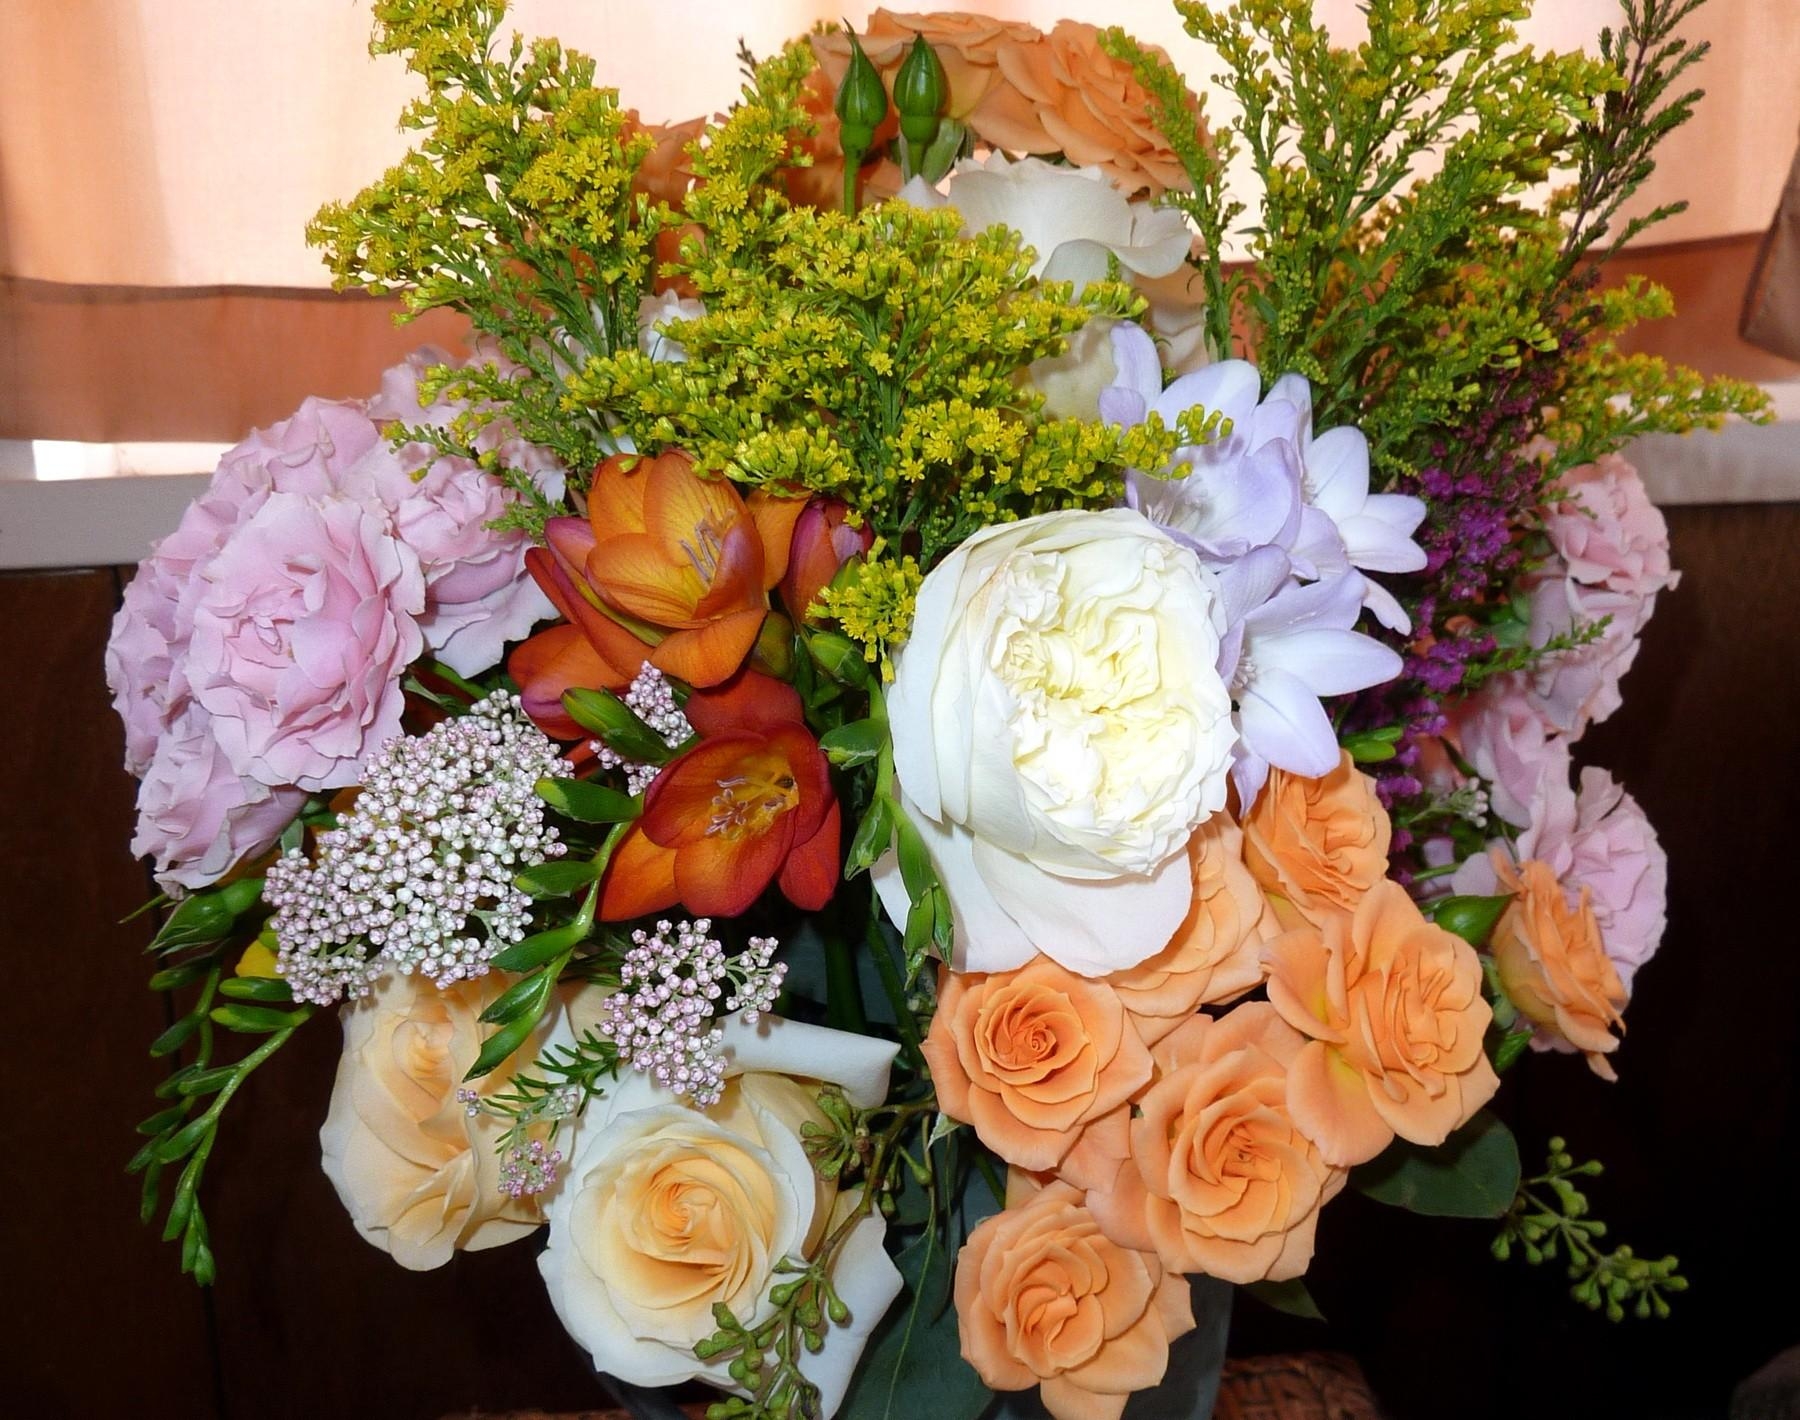 flowers, roses, peonies, greens, bouquet, composition, freesia